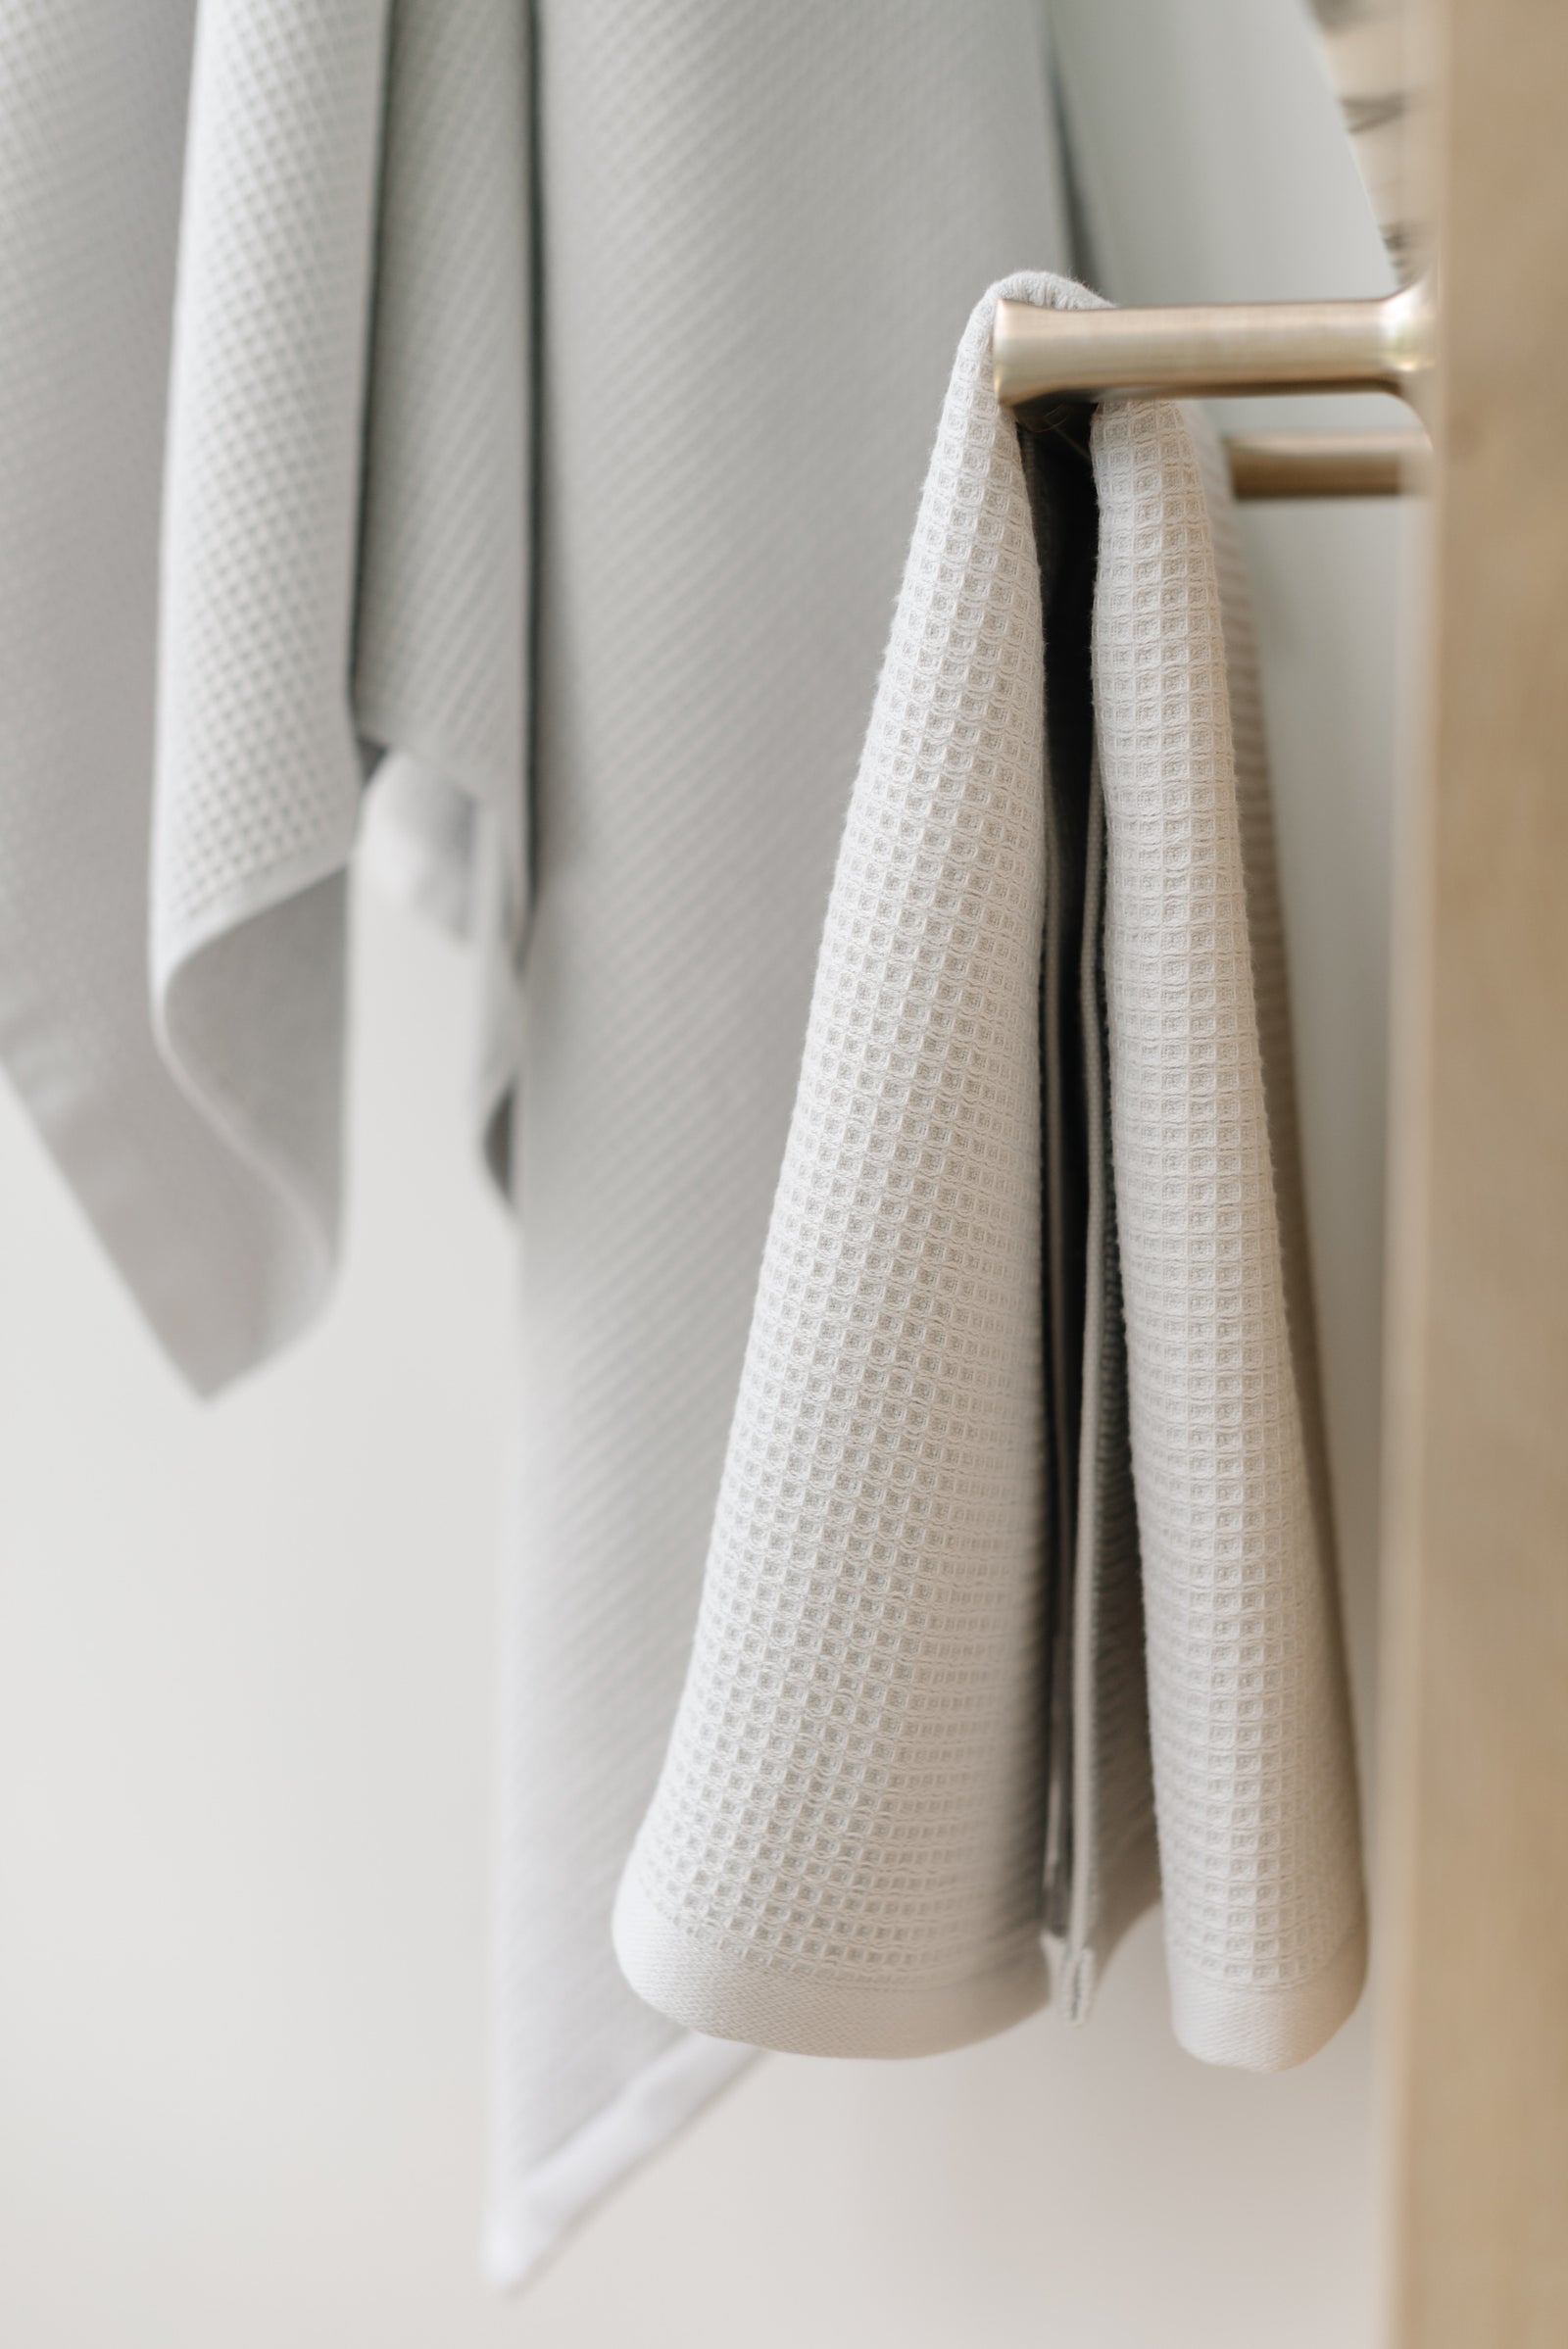 Light Grey Waffle Hang Towel handing from a gold towel bar.  The photo was taken at a white marble bathroom sink. A Waffle Bath Towel is seen hanging on the wall in the background. 